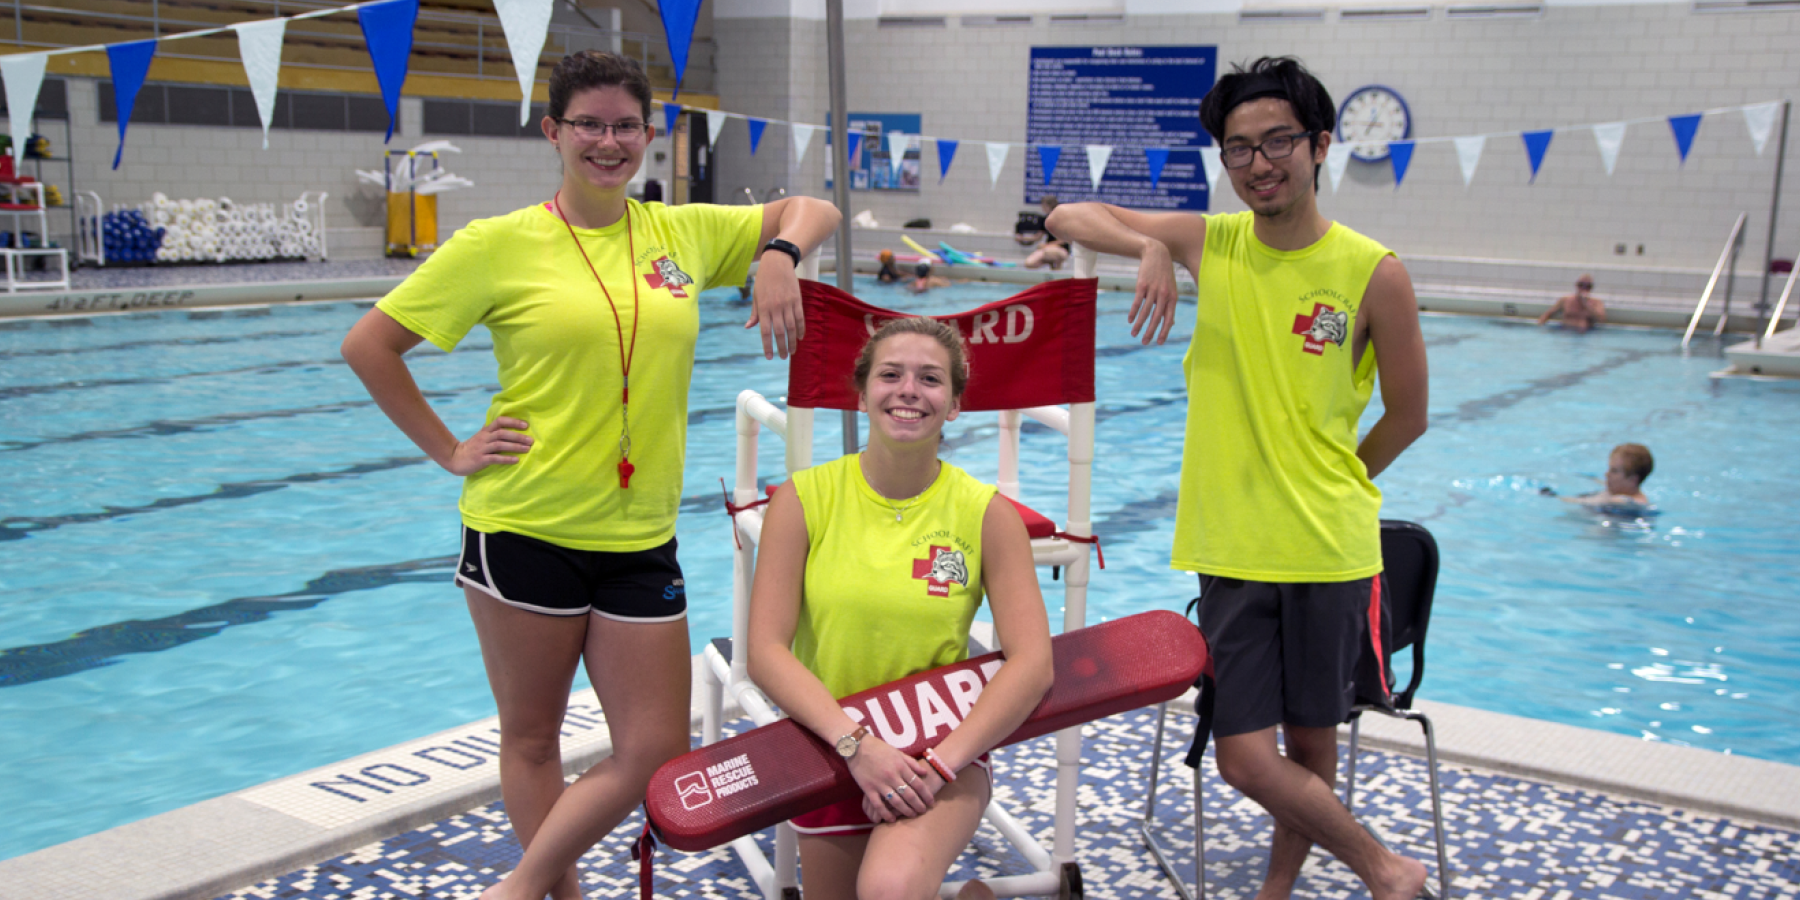 Lifeguards by a pool